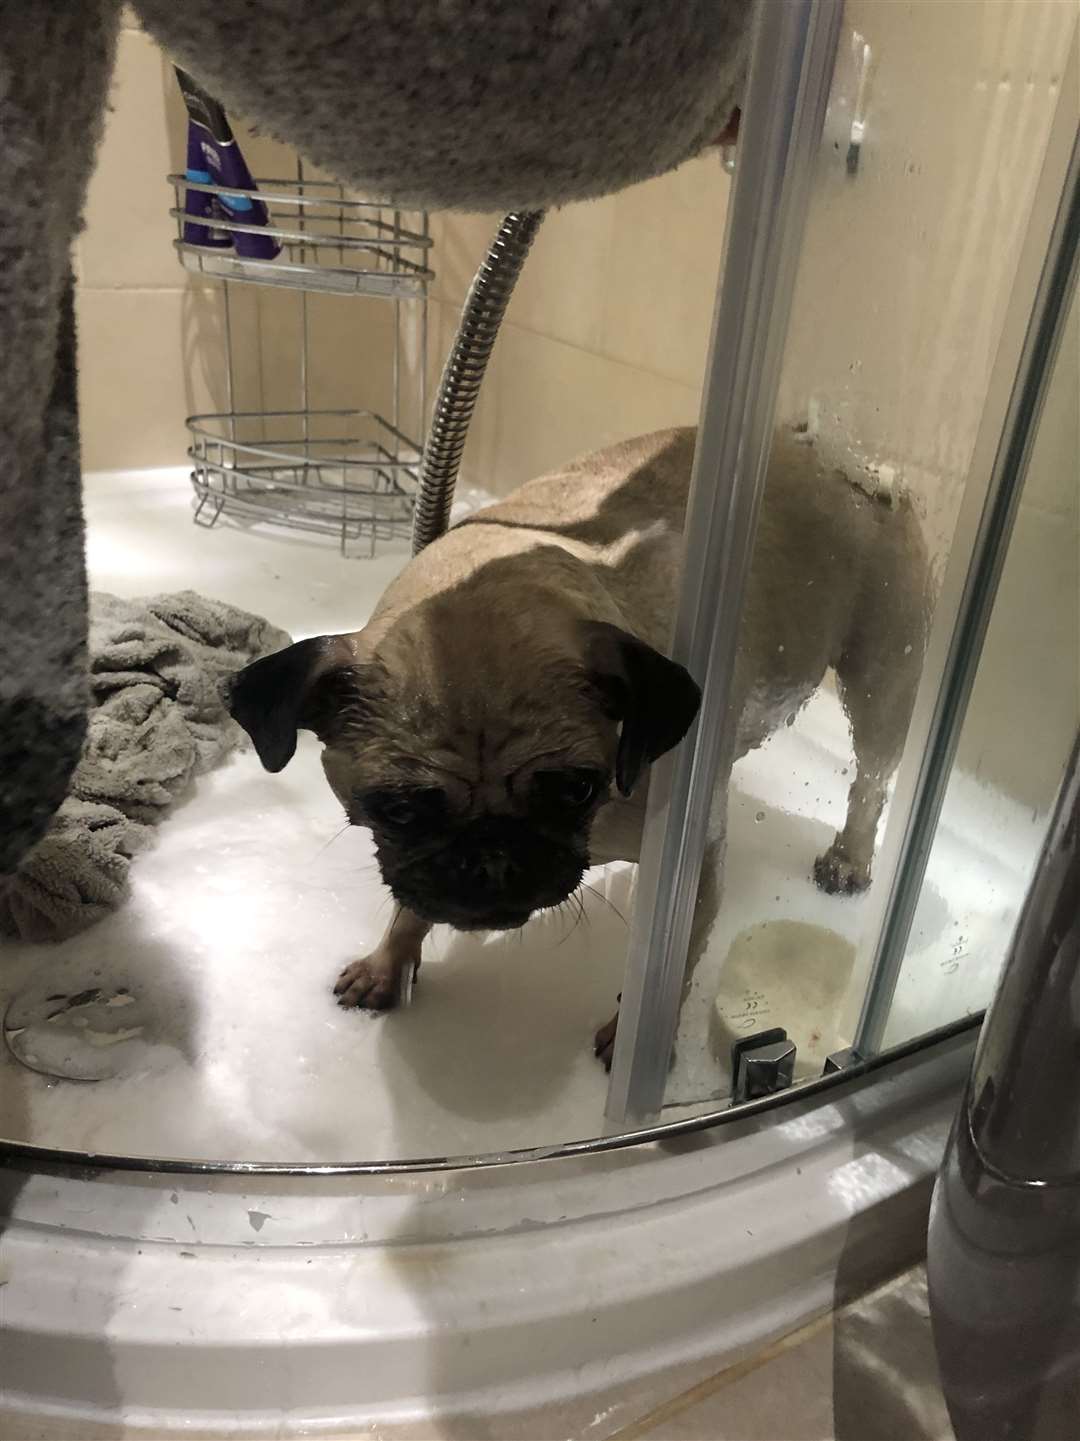 Kiki the pug gets cleaned up after her ordeal in the well (9099802)